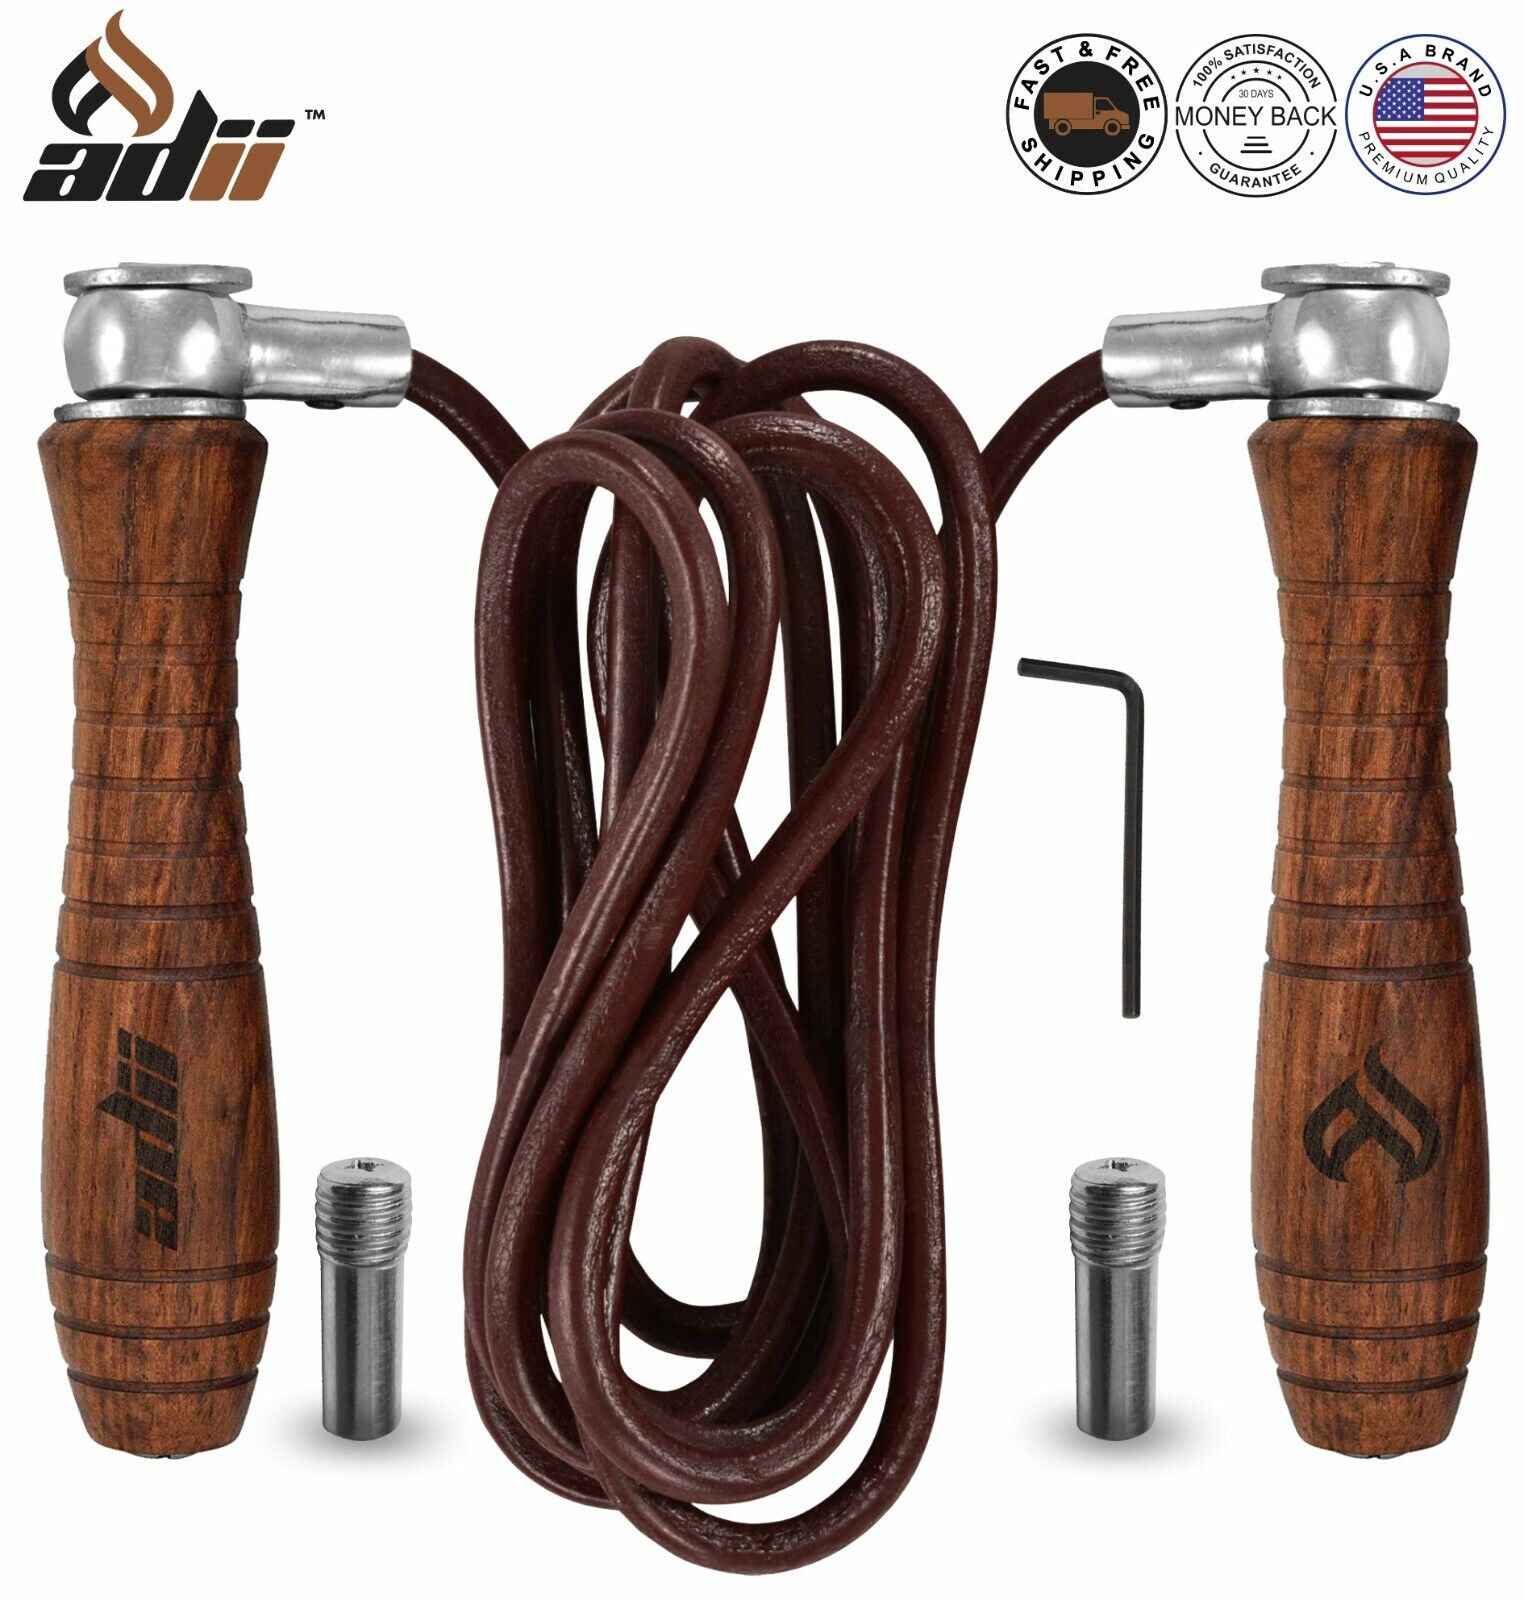 ADii™ Leather Skipping Adjustable Weighted Speed Jump Rope Gym Boxing Fitness   ADii™ ADii™ Leather Jump Rope